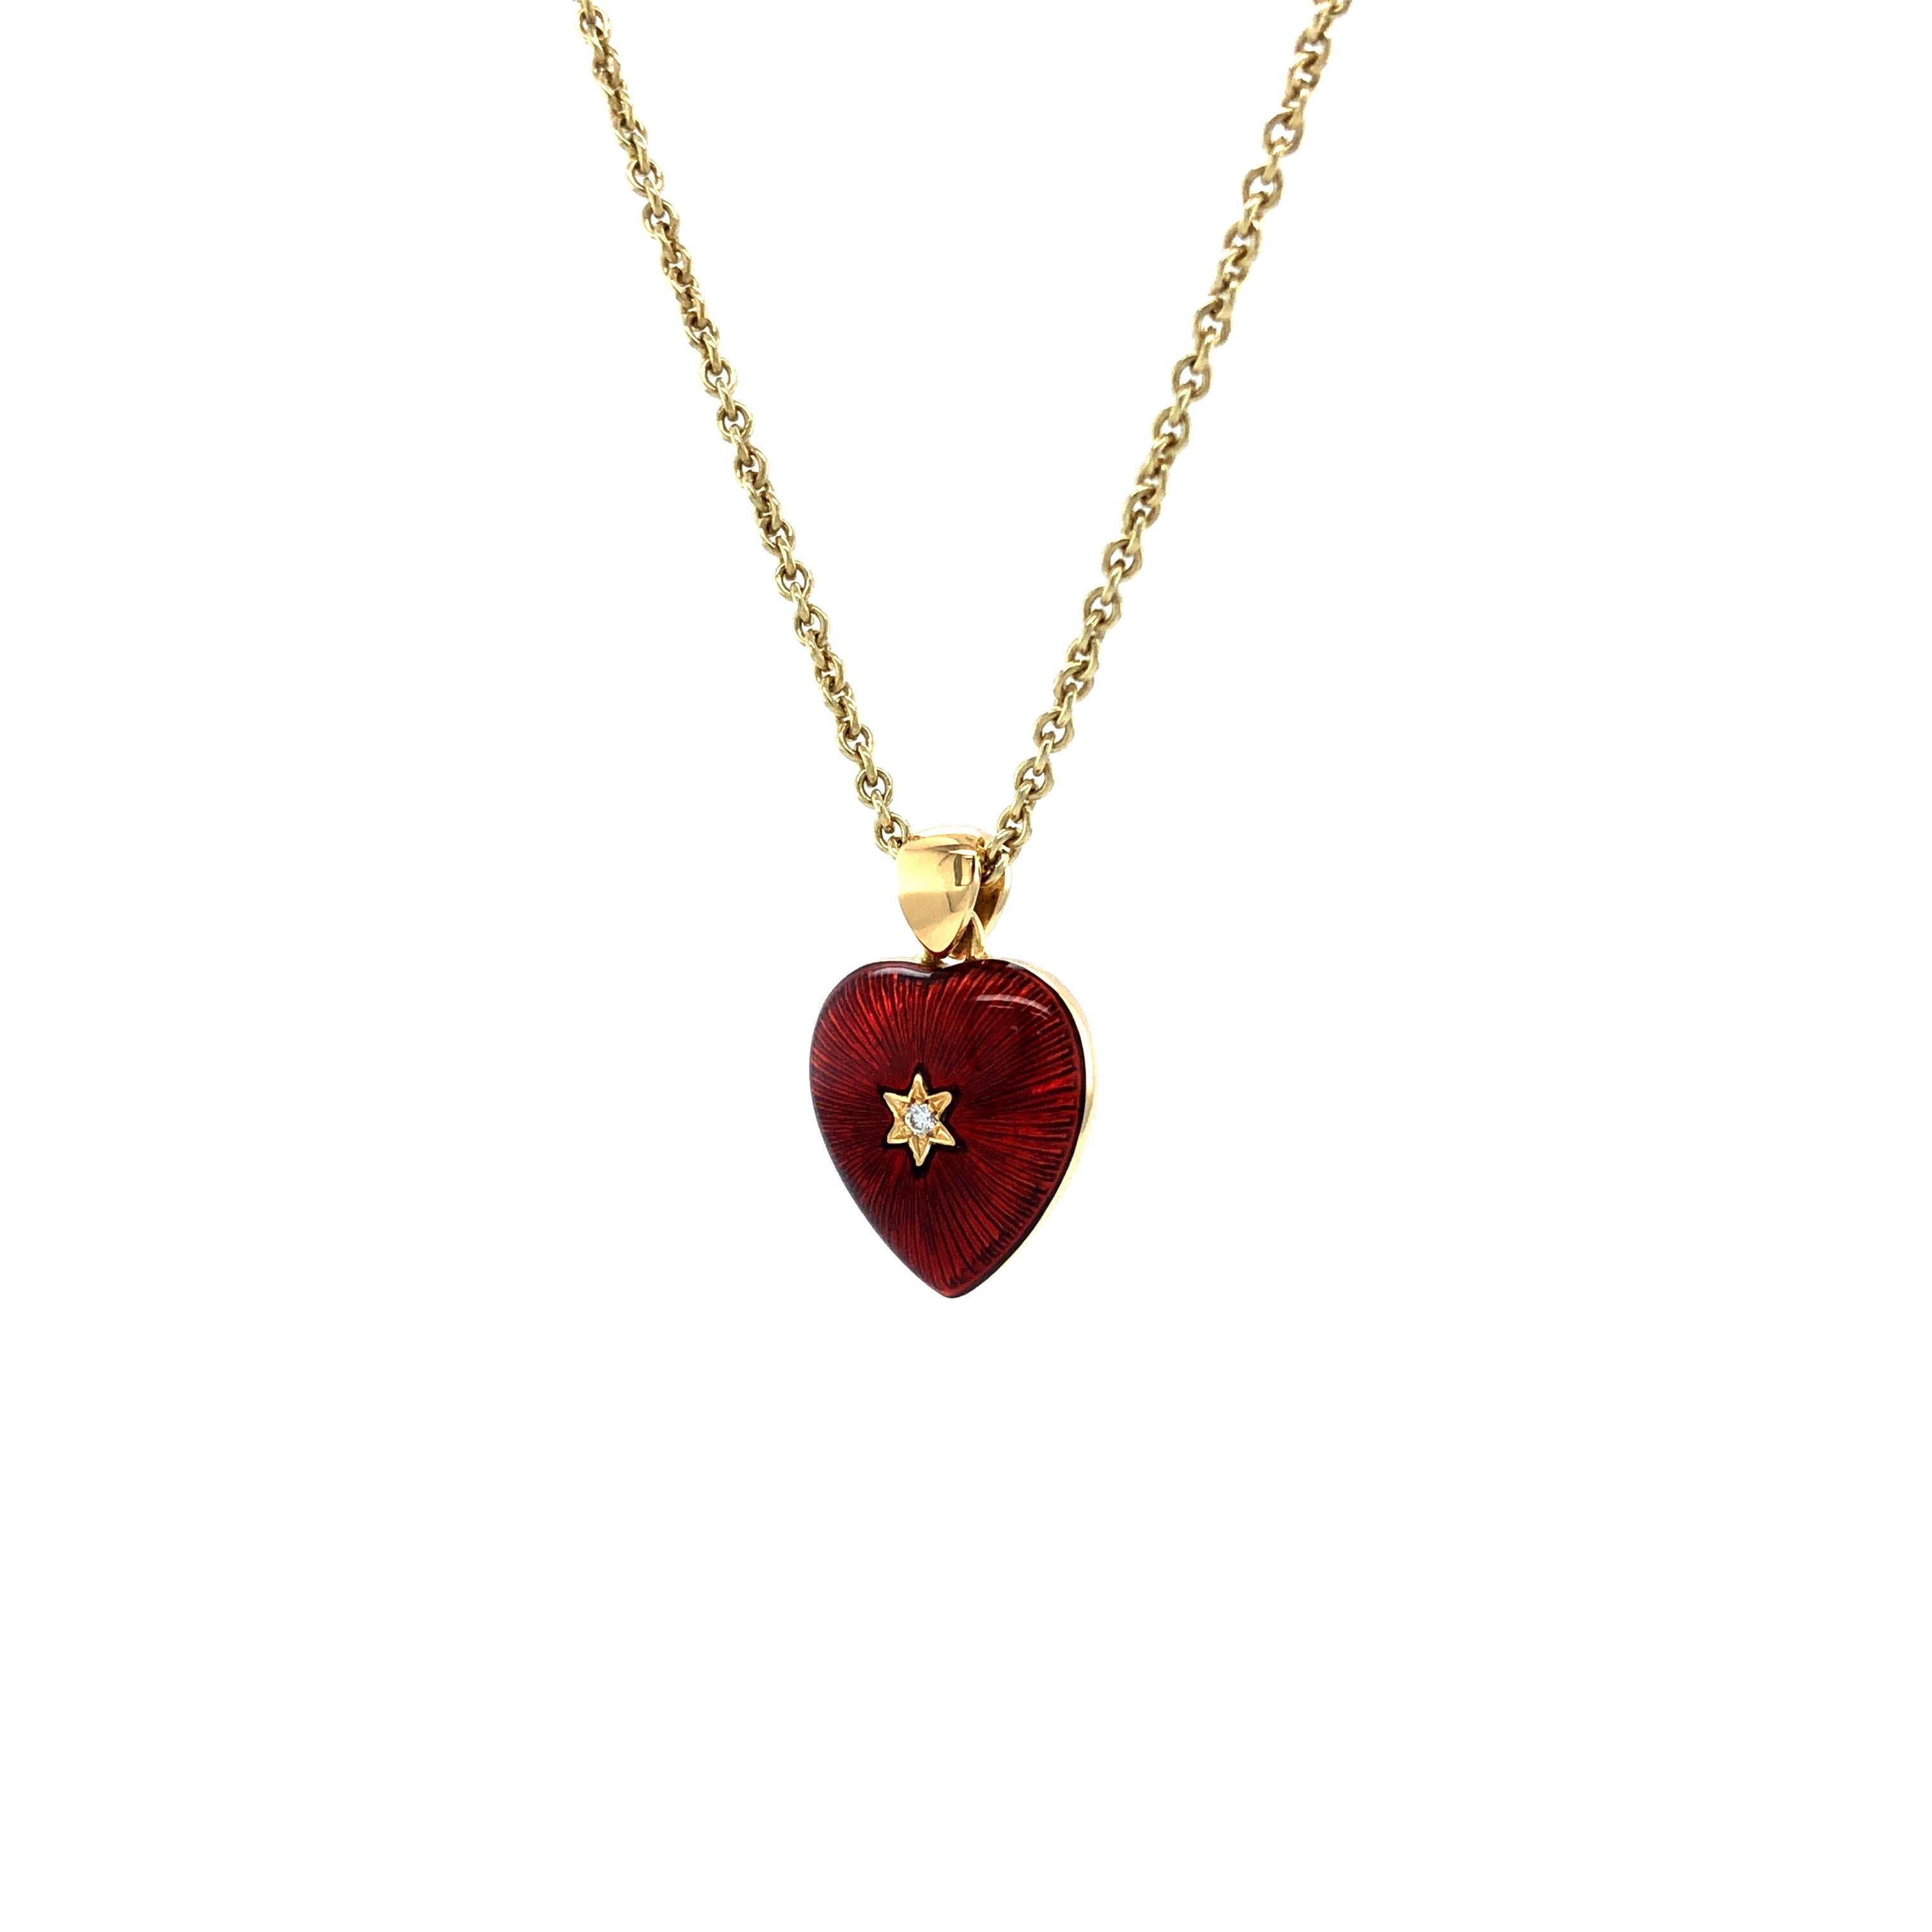 Heart Pendant Necklace 18k Yellow Gold Red and Pink Enamel 2 Diamonds 2.02ct GVS In New Condition For Sale In Pforzheim, DE